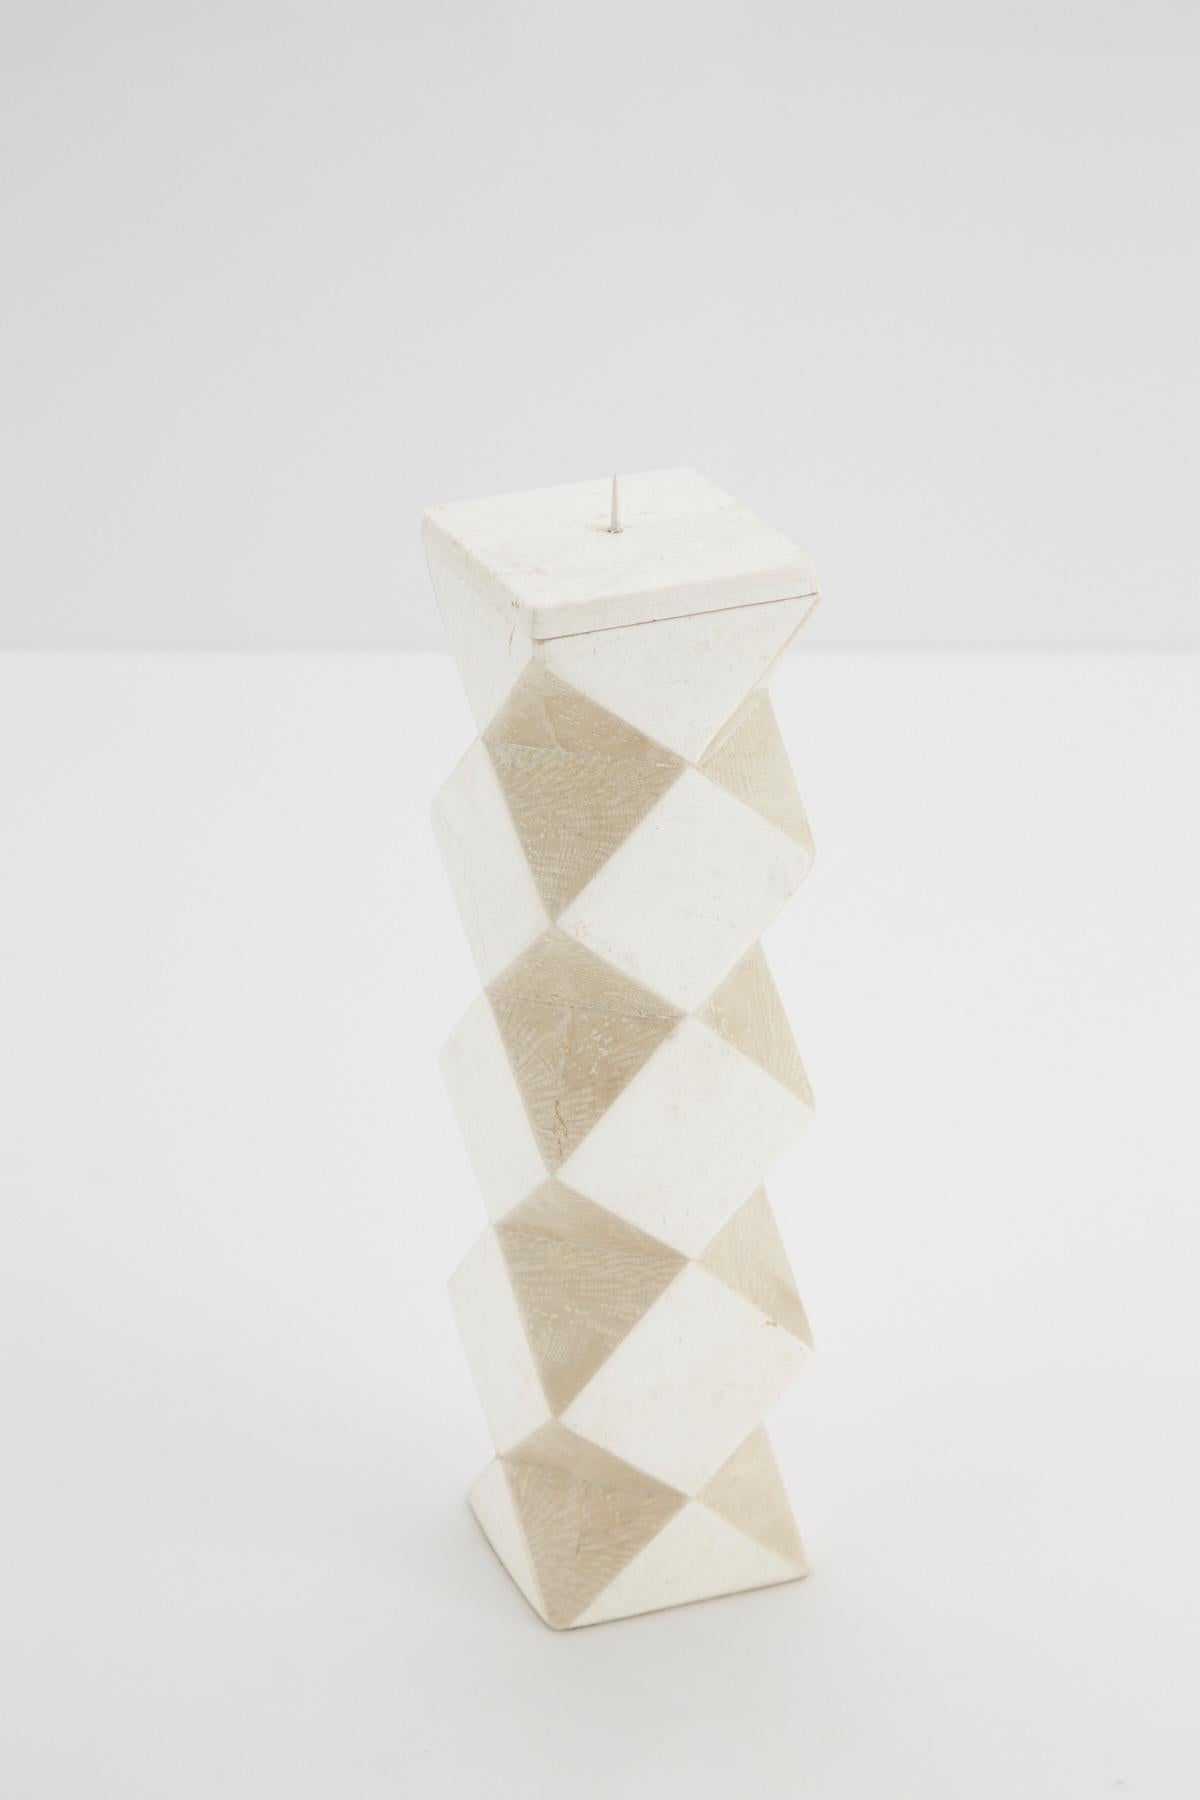 Convertible Faceted Postmodern Tessellated Stone Candlestick or Vase, 1990s In Excellent Condition For Sale In Los Angeles, CA